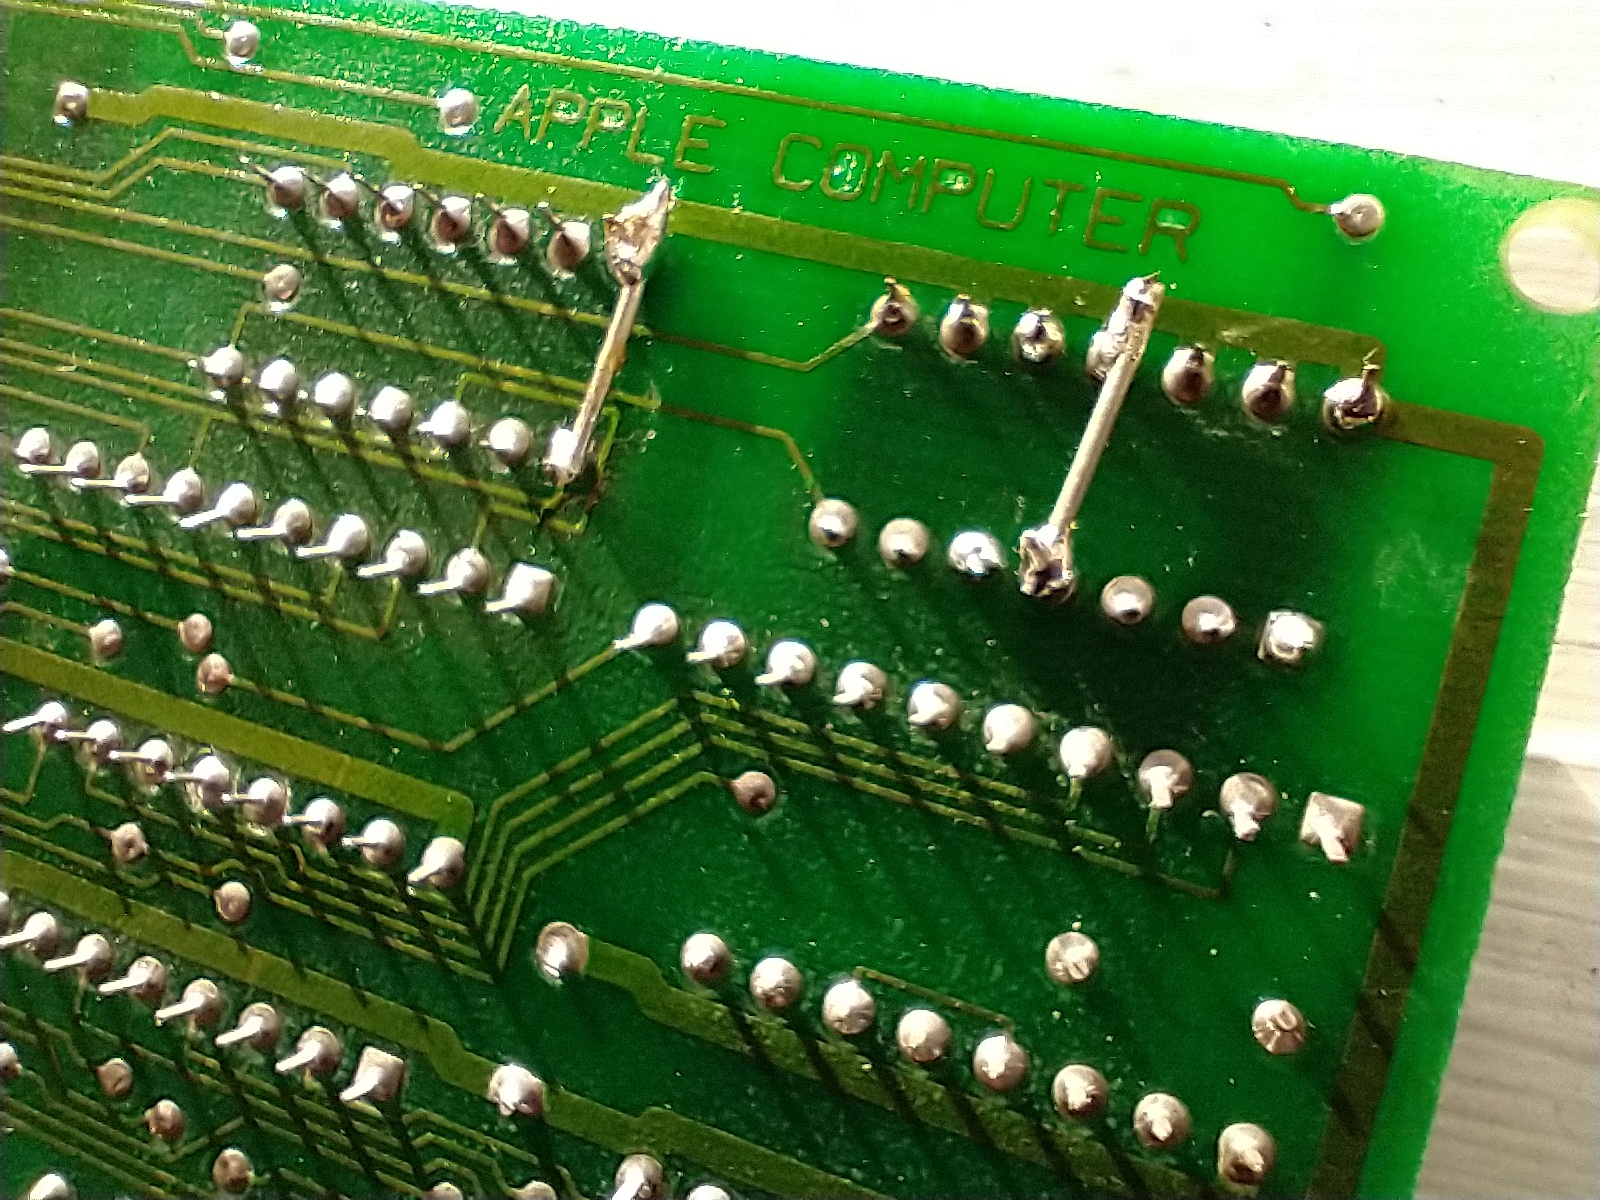 Back of a circuit board with two extra wires soldered on